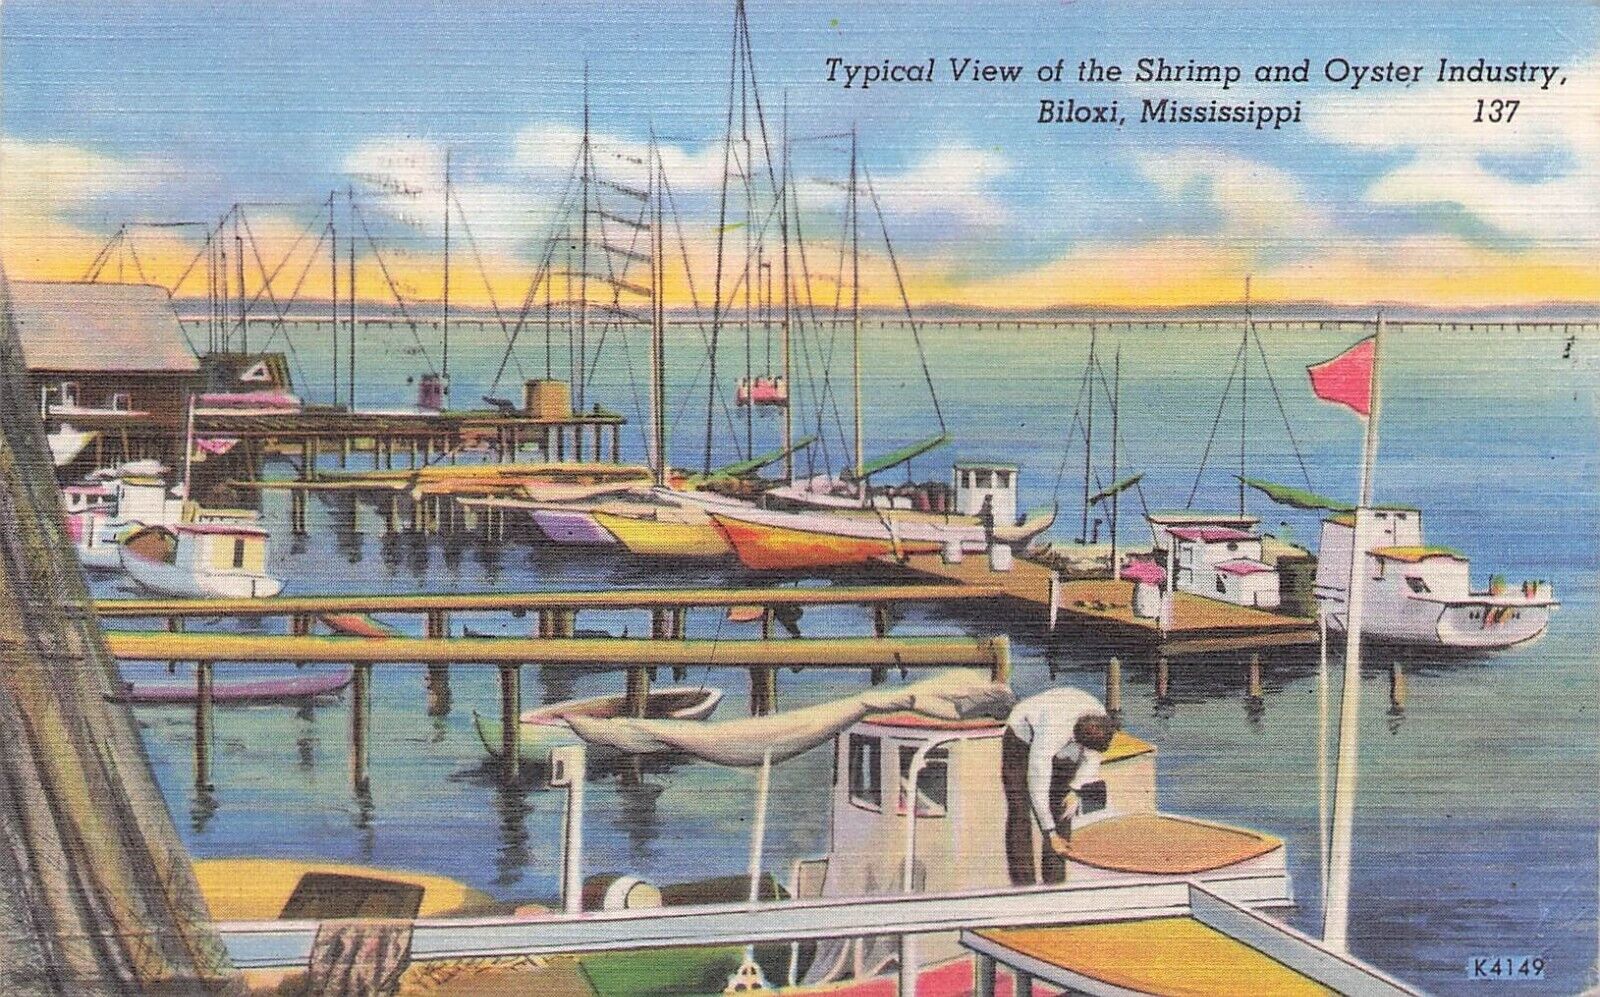 Shrimp and Oyster Industry Biloxi Mississippi PM 1954